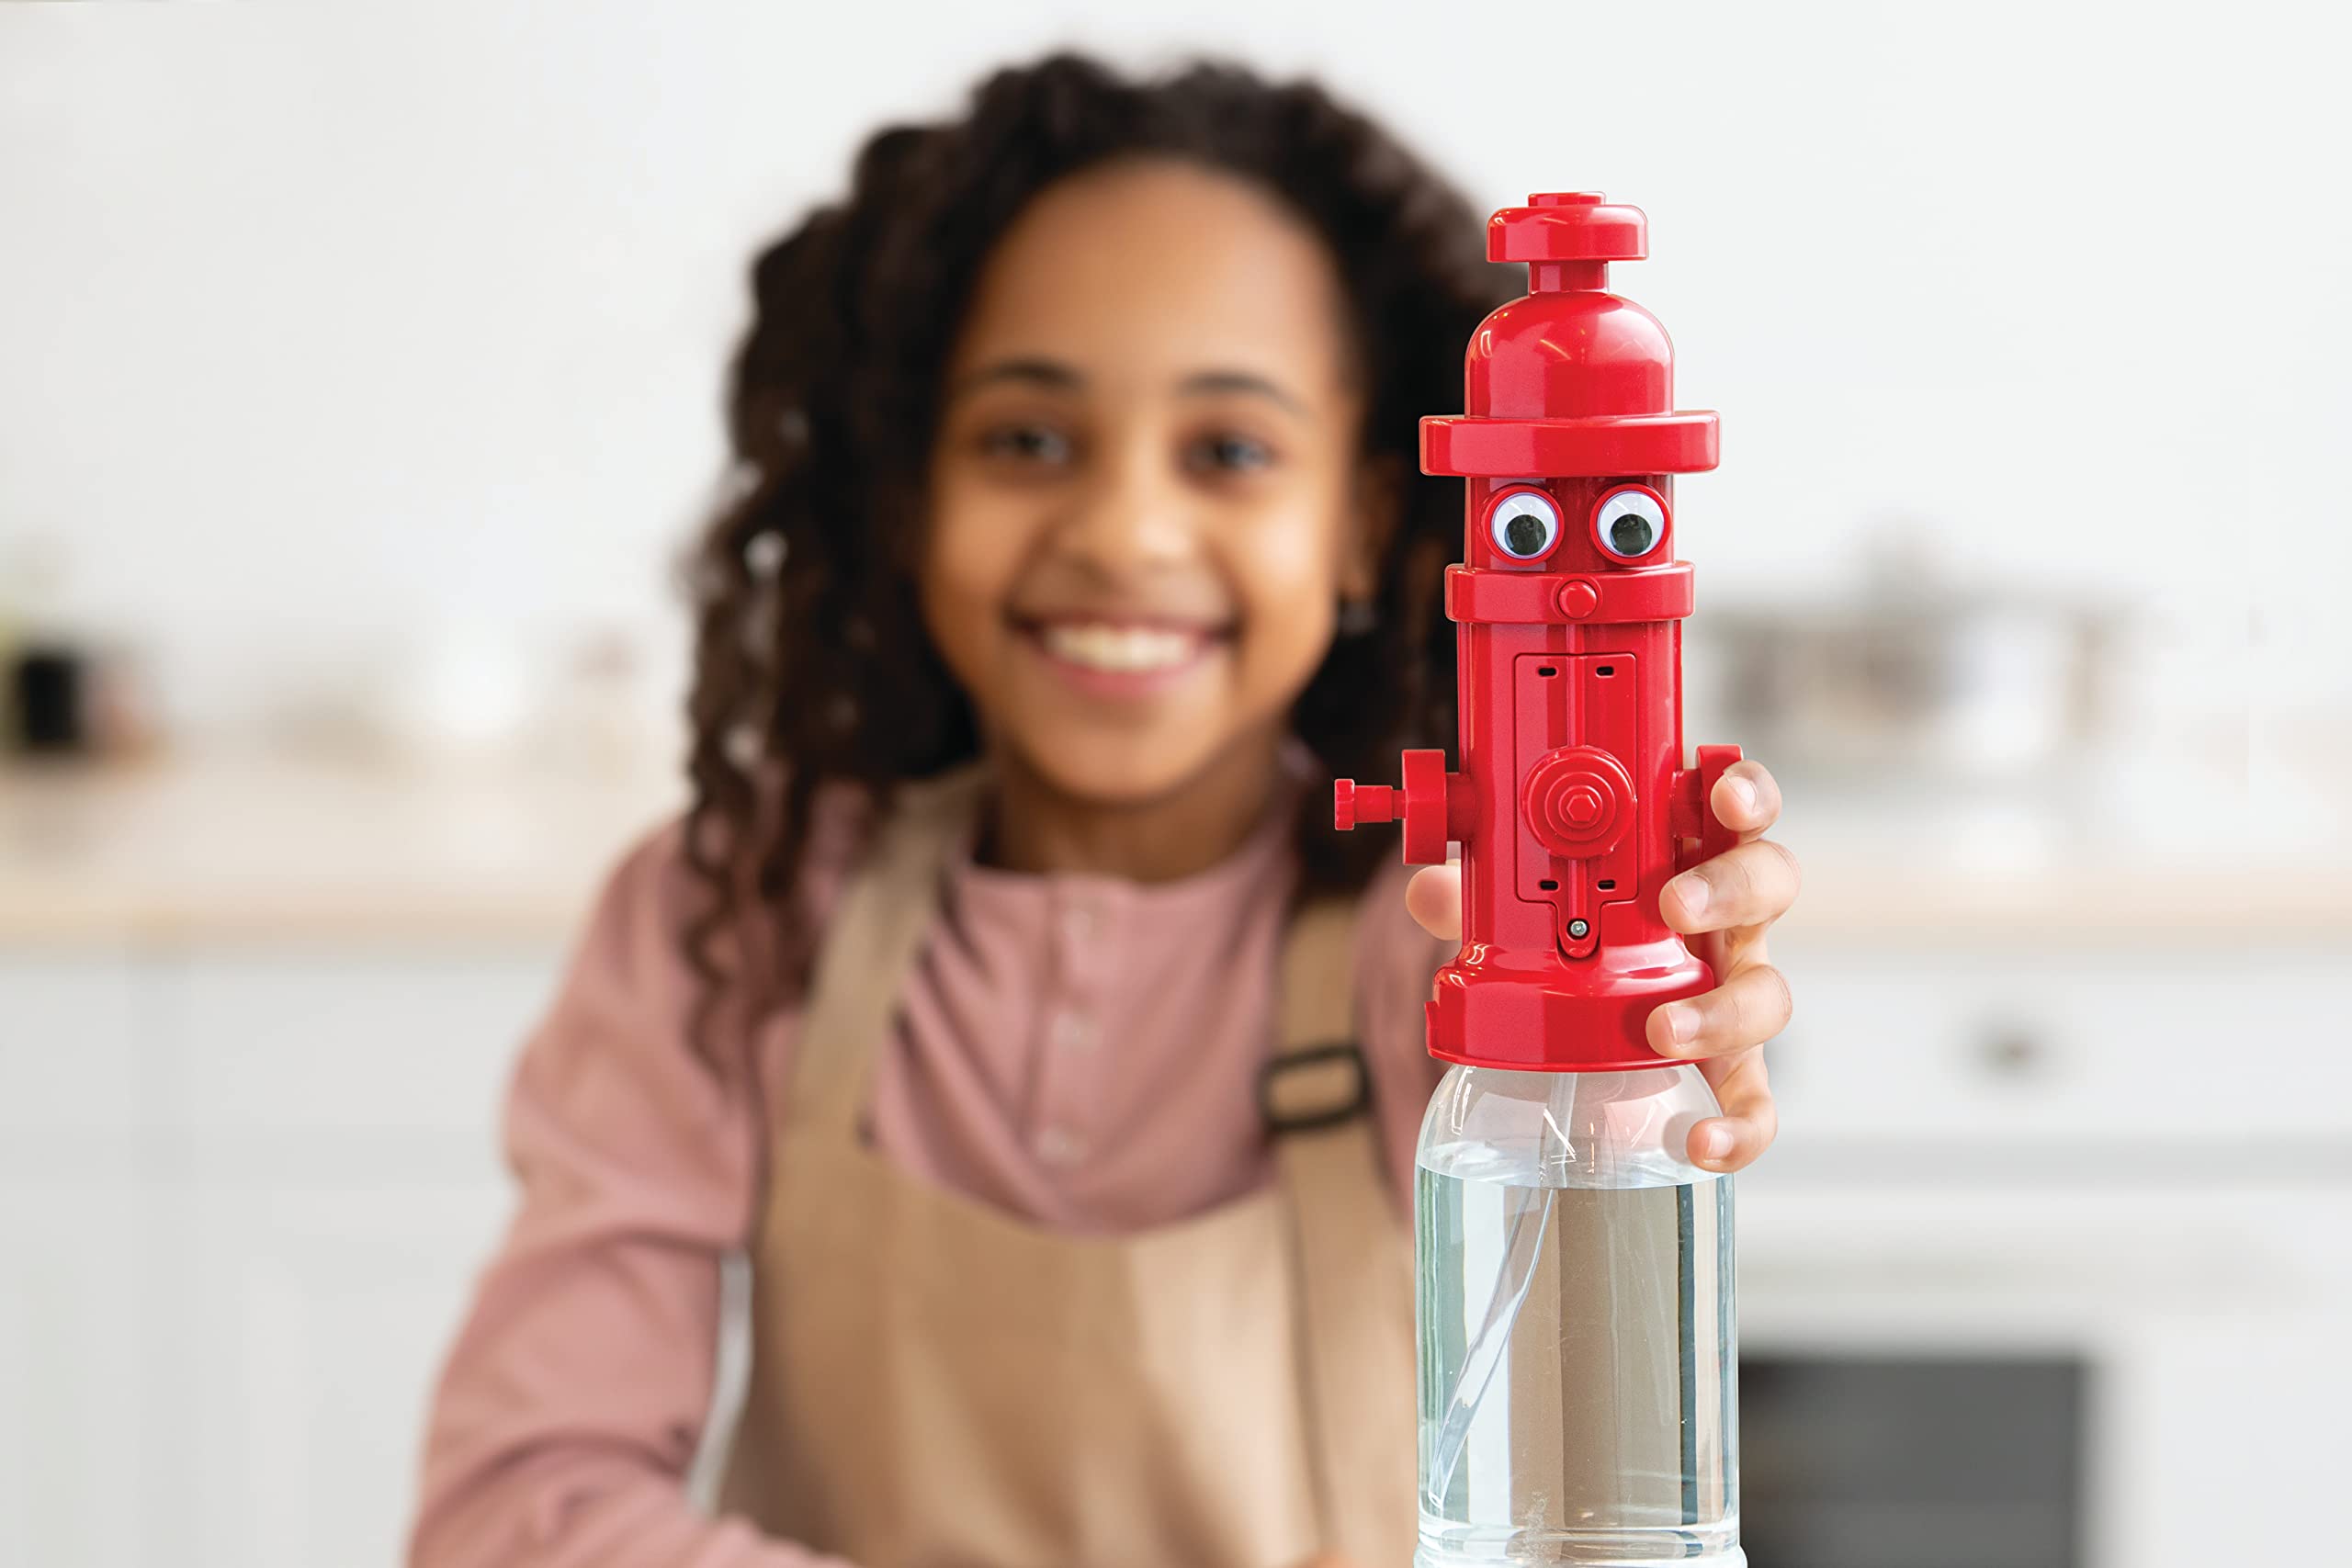 KidzRobotix | Hydrant Robot | Build a Cute Hydrant Robot | Learn The Mechanics of Water Pumps | for Kids Ages 8+